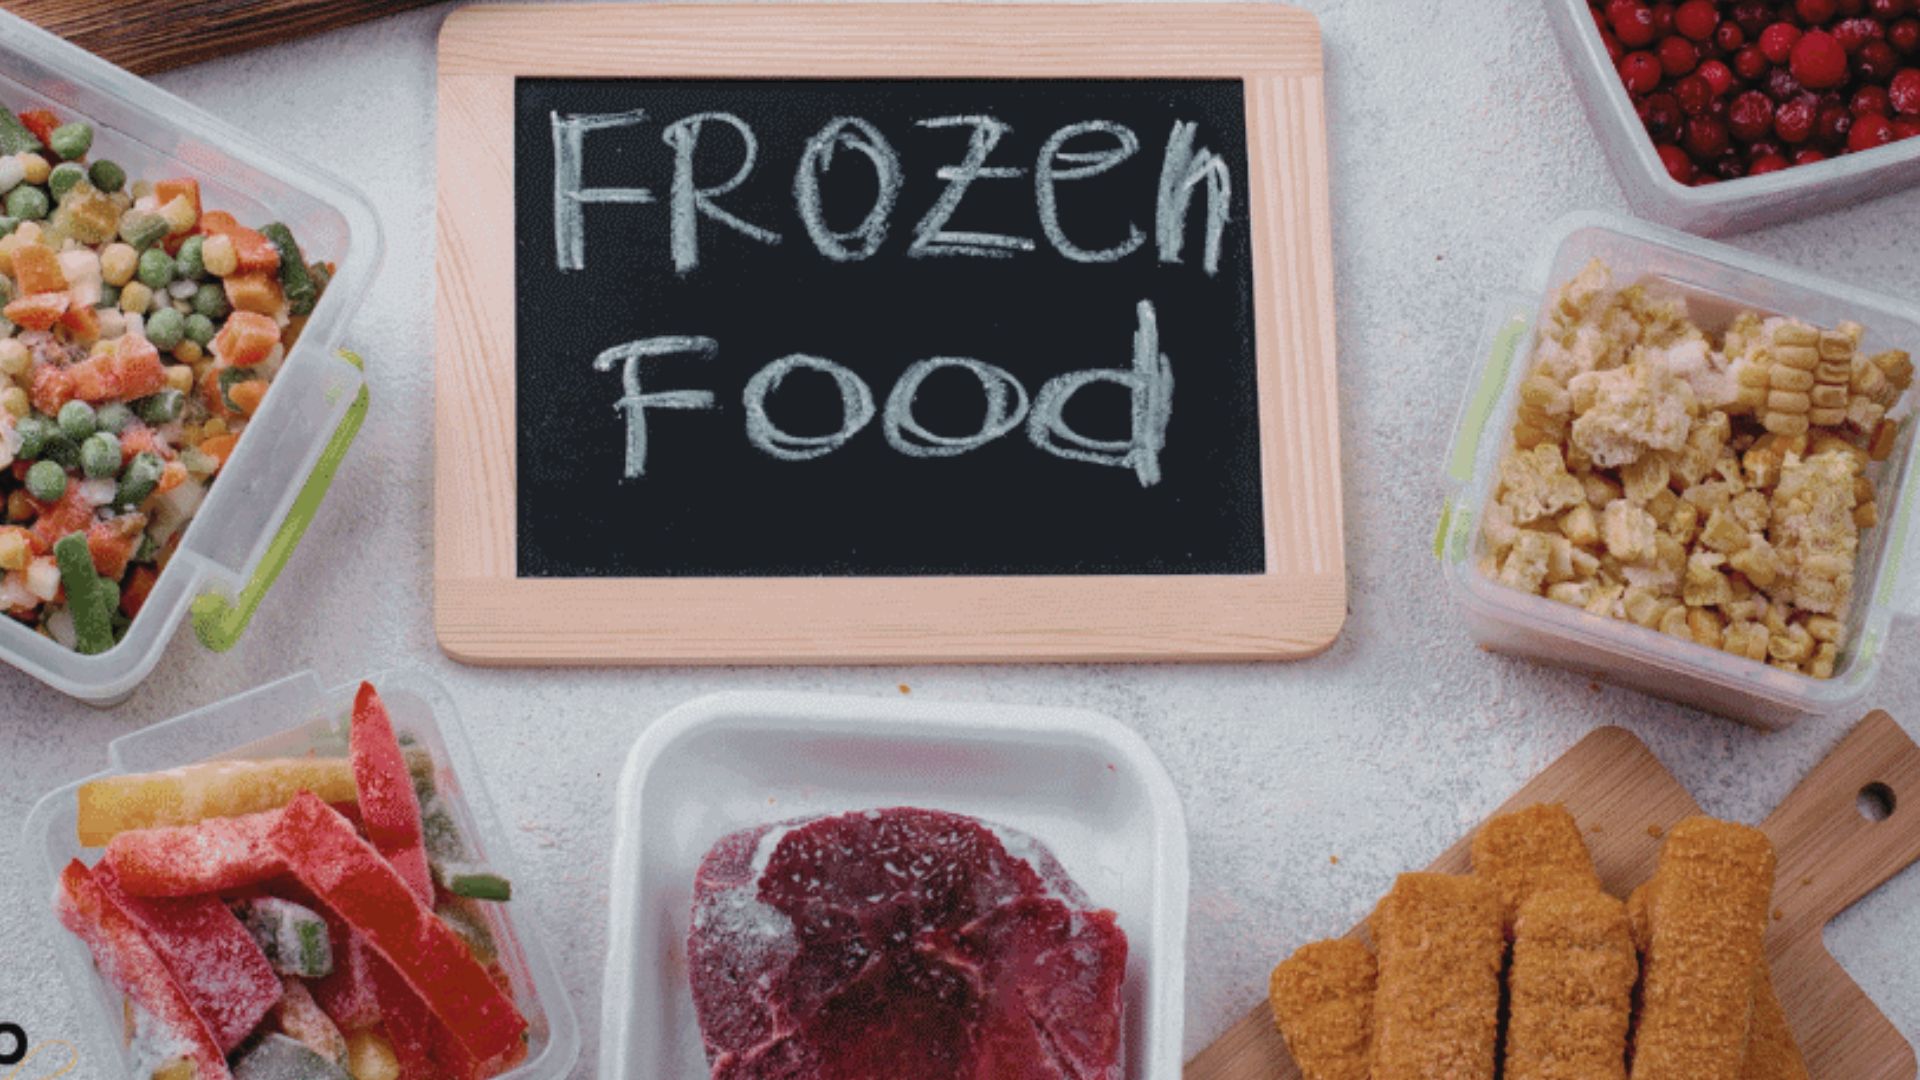 13 Frozen Food Brands in India: Popular and Affordable